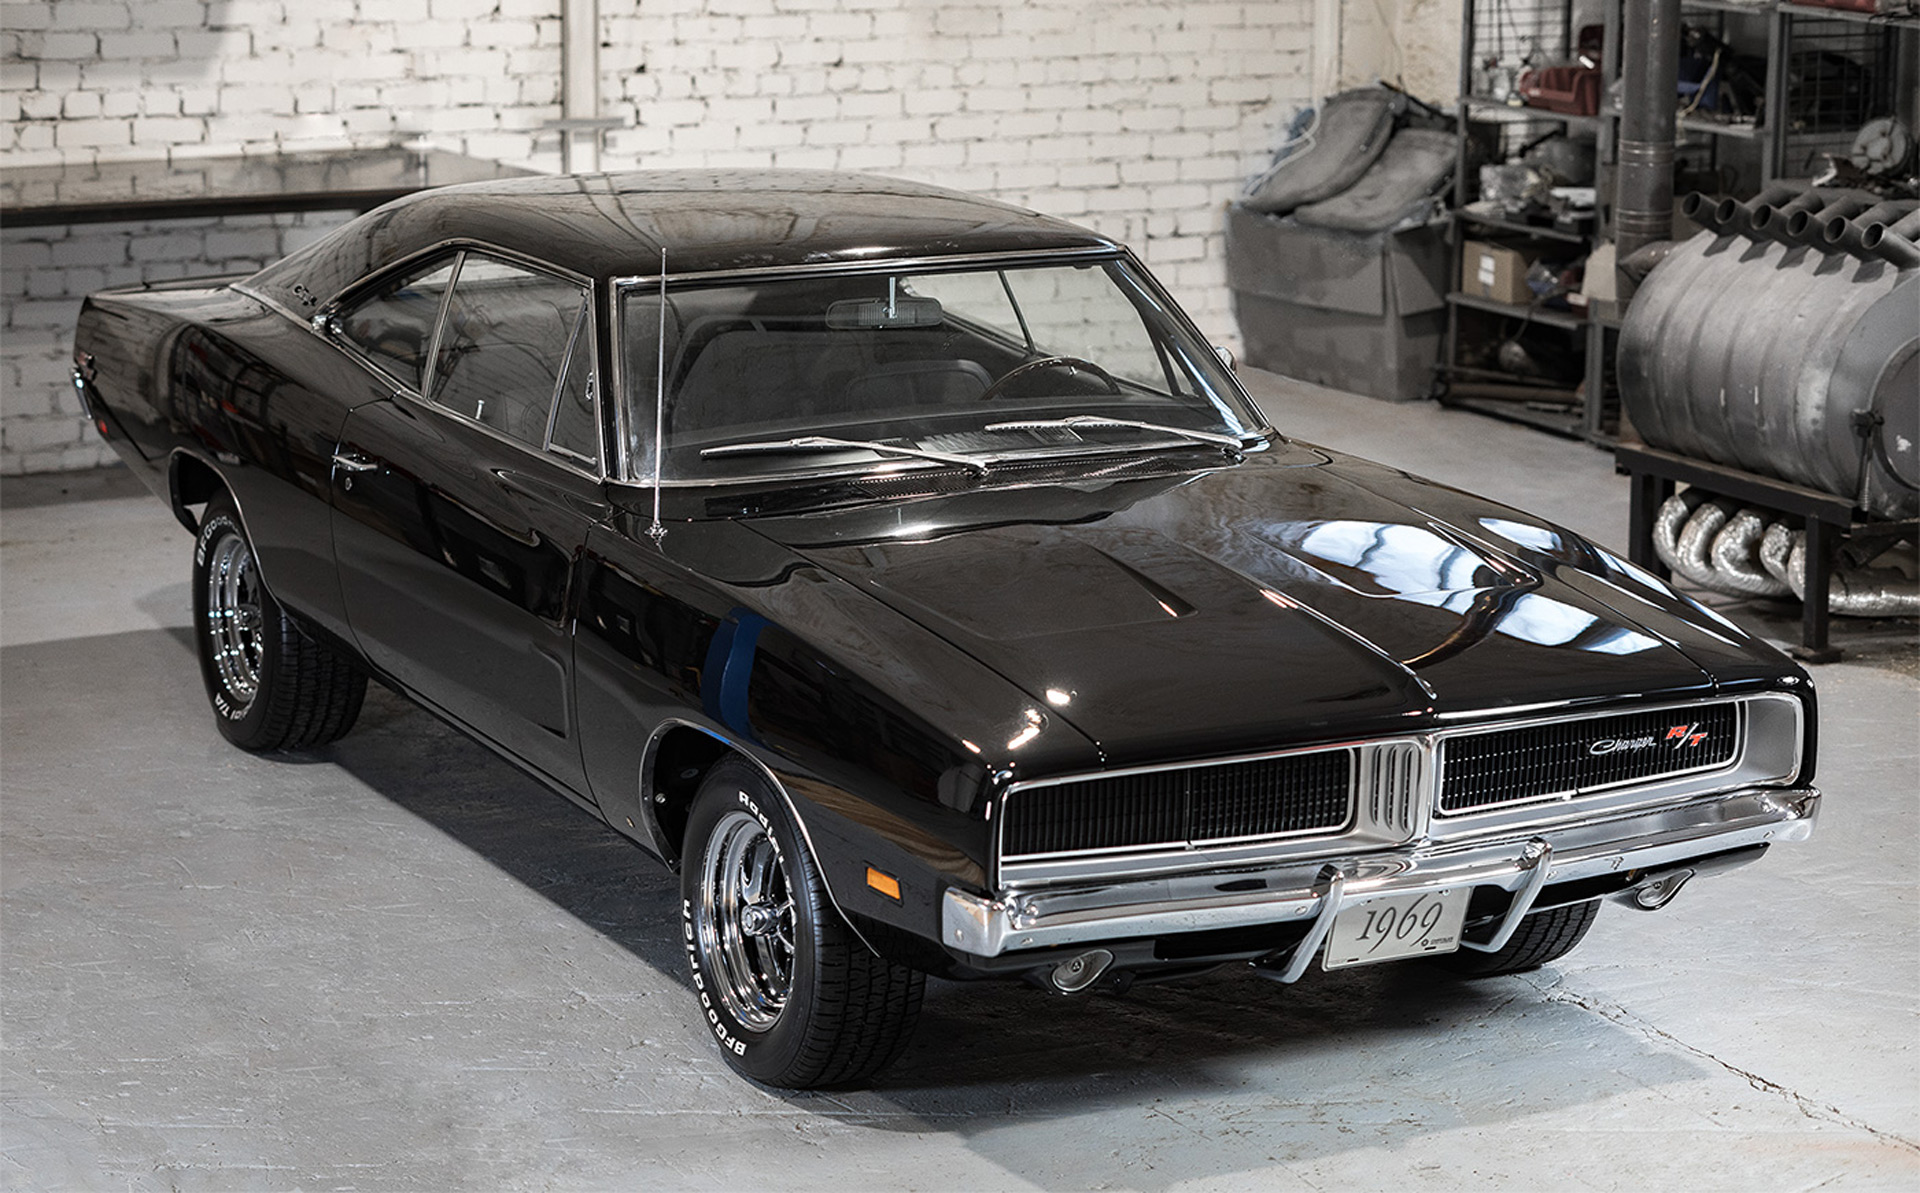 Classic American Muscles Car - 1969 Dodge Charger RT